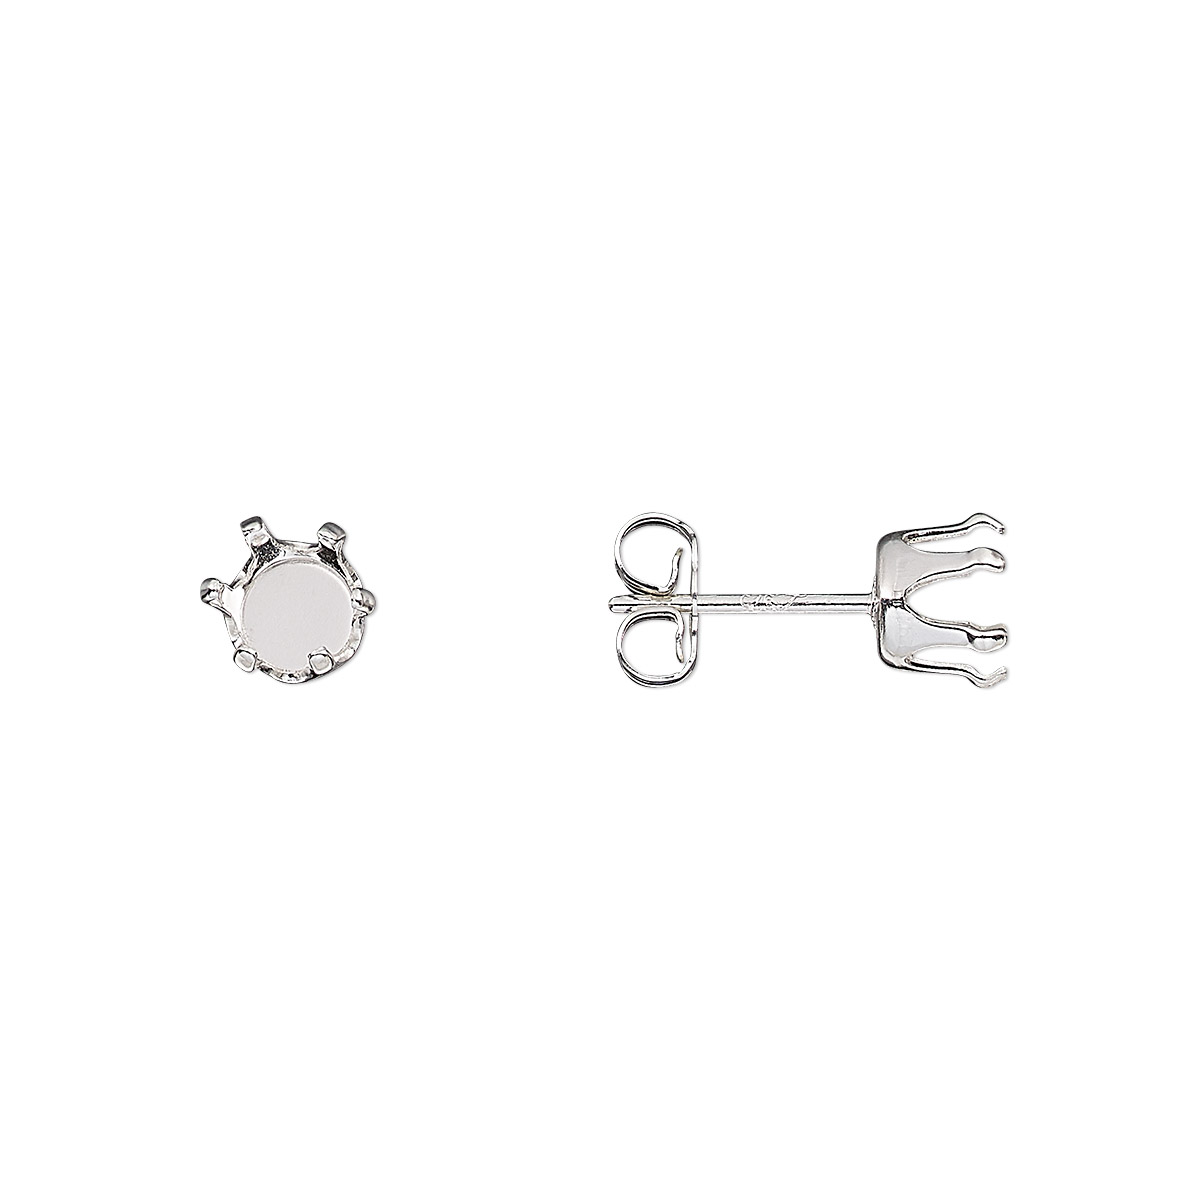 Earstud, Snap-Tite®, sterling silver, 5mm 6-prong round setting. Sold ...